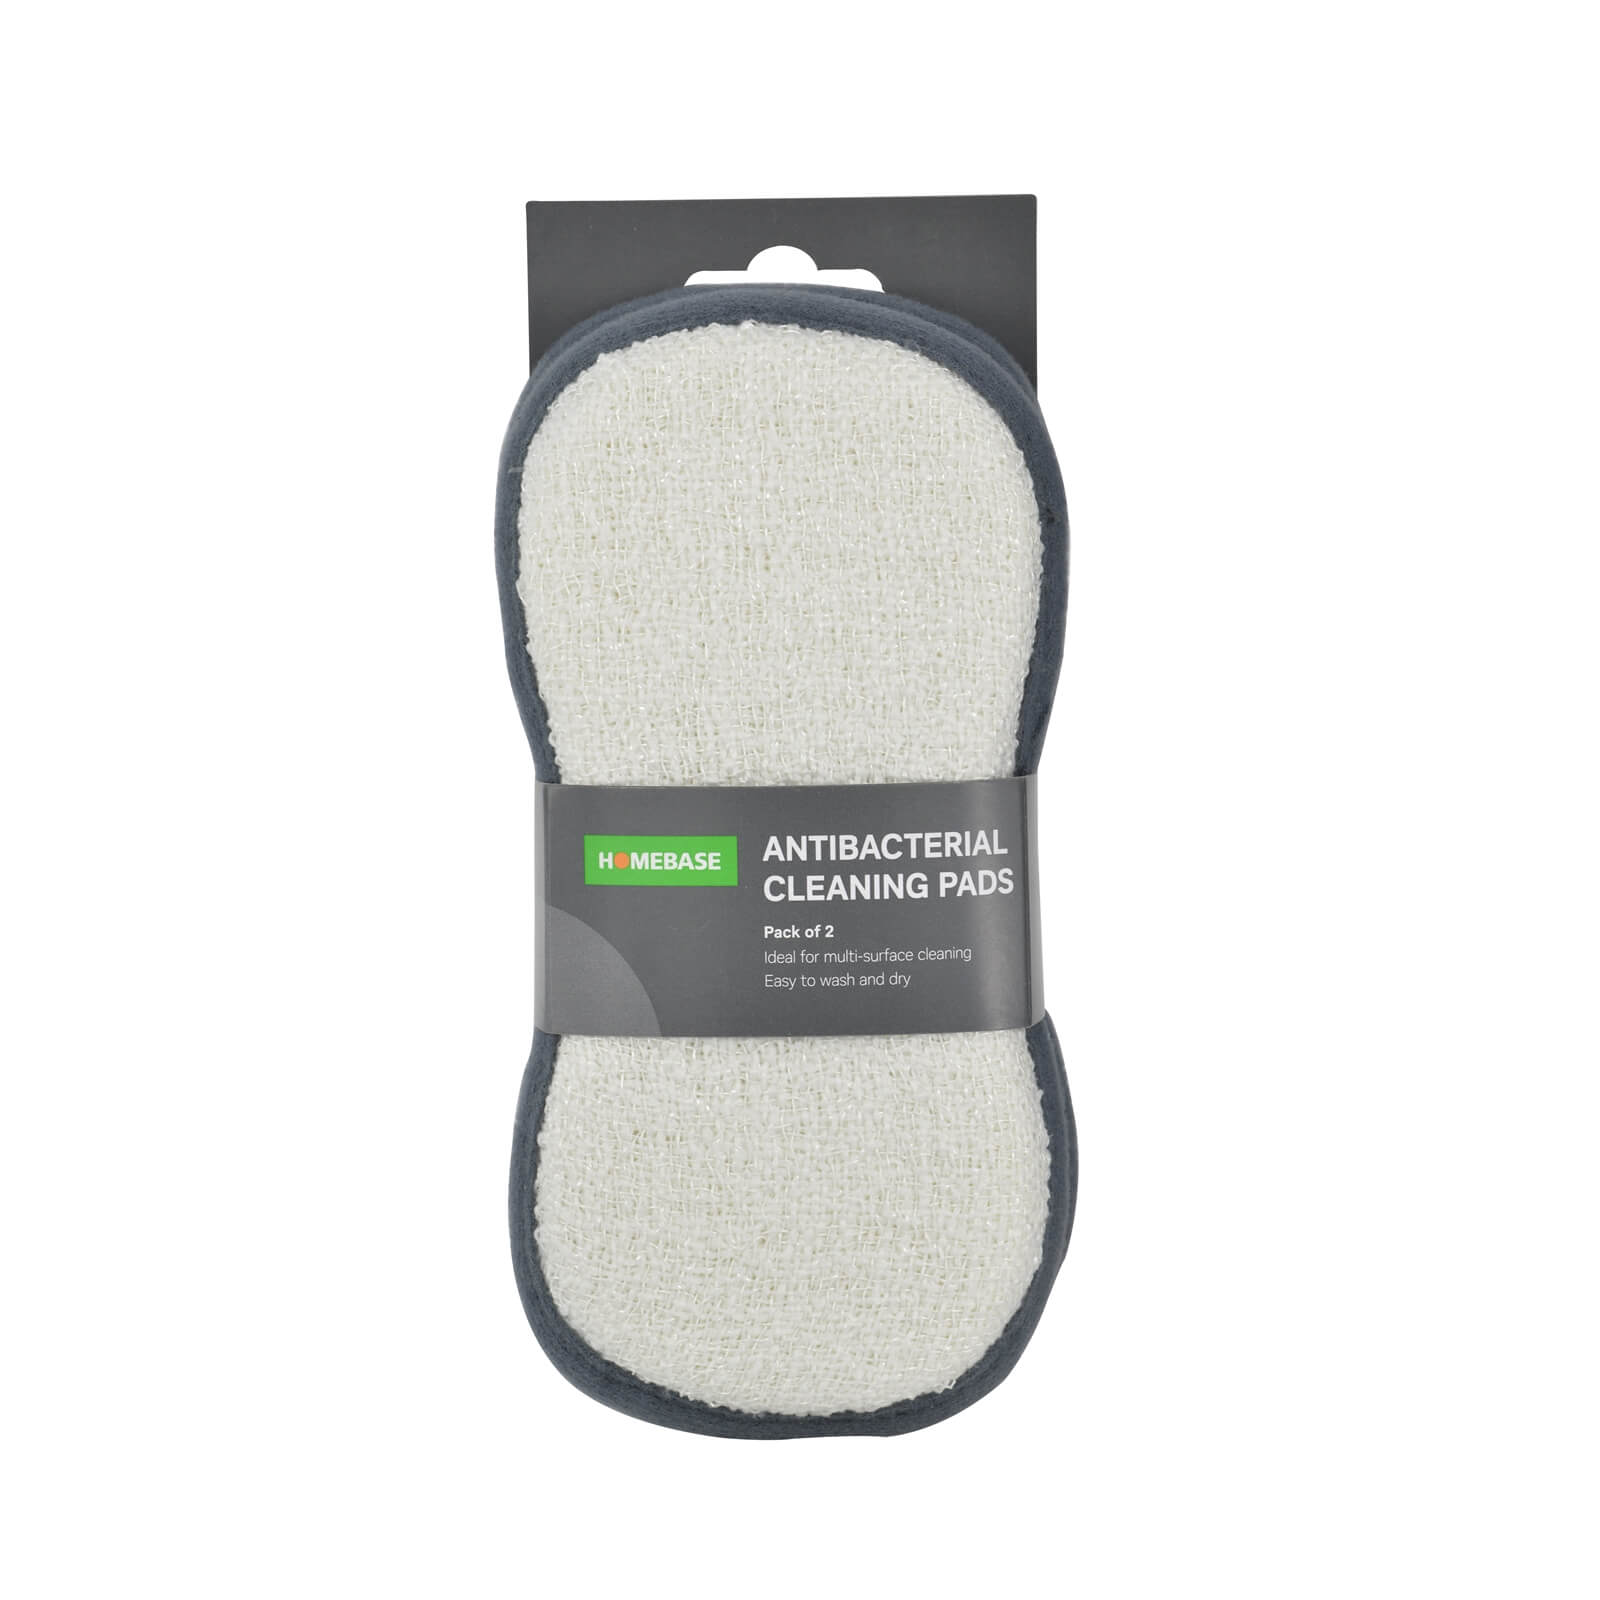 2 Pack of Antibacterial Cleaning Pads